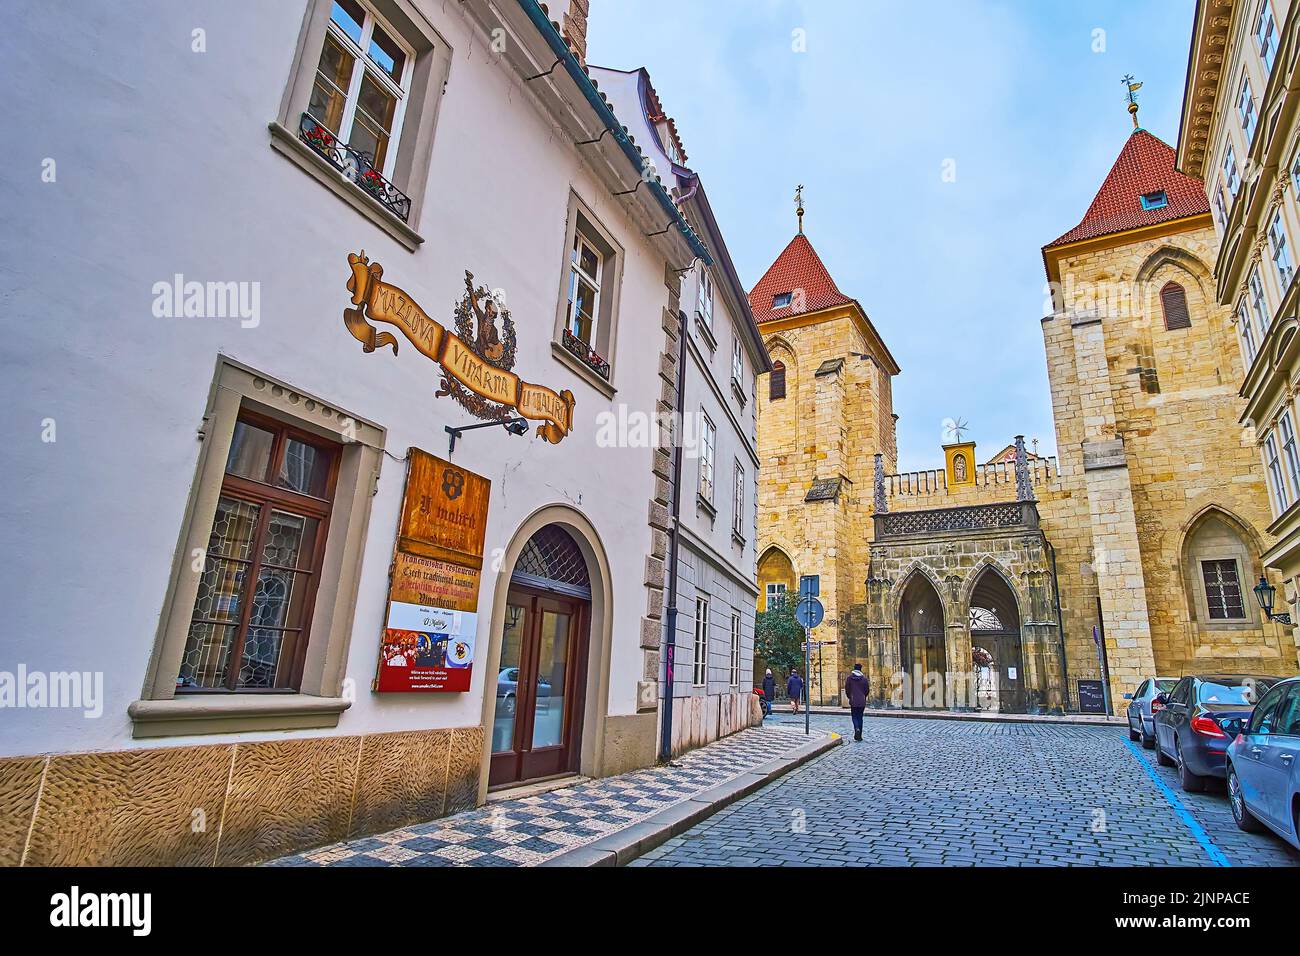 PRAGUE, CZECH REPUBLIC - MARCH 6, 2022: Lazenska Street of Lesser Quarter opens the view on the medieval gate and bell towers of Johannite Monastery, Stock Photo